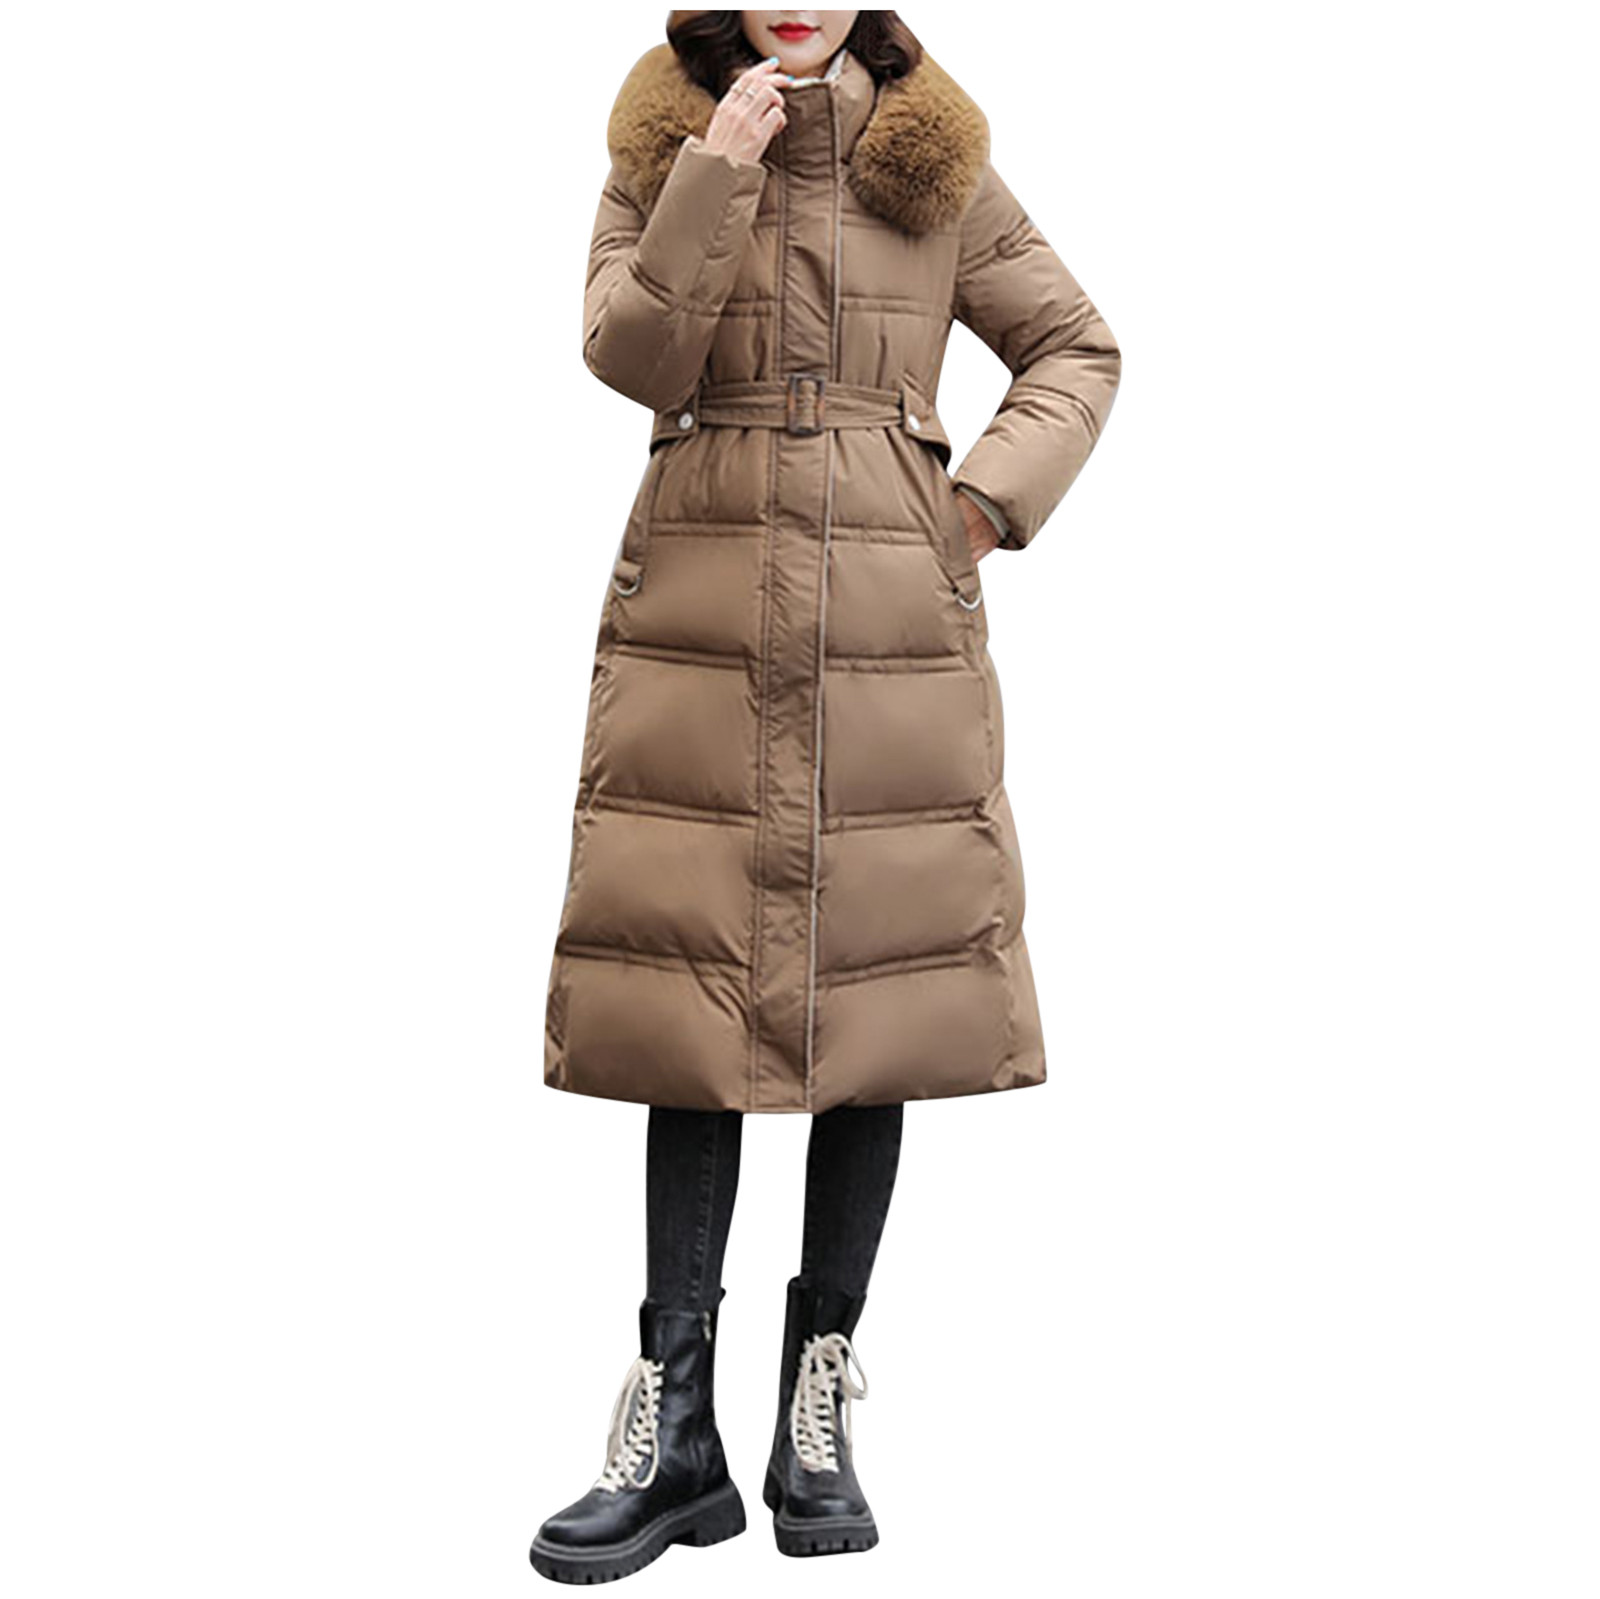 vbnergoie Womens Warm Winter Coat Thicken Cotton Jacket Quilted With Artificial Fur-grass Trimmed Hooded Max Co Coat Womens Green - image 1 of 8